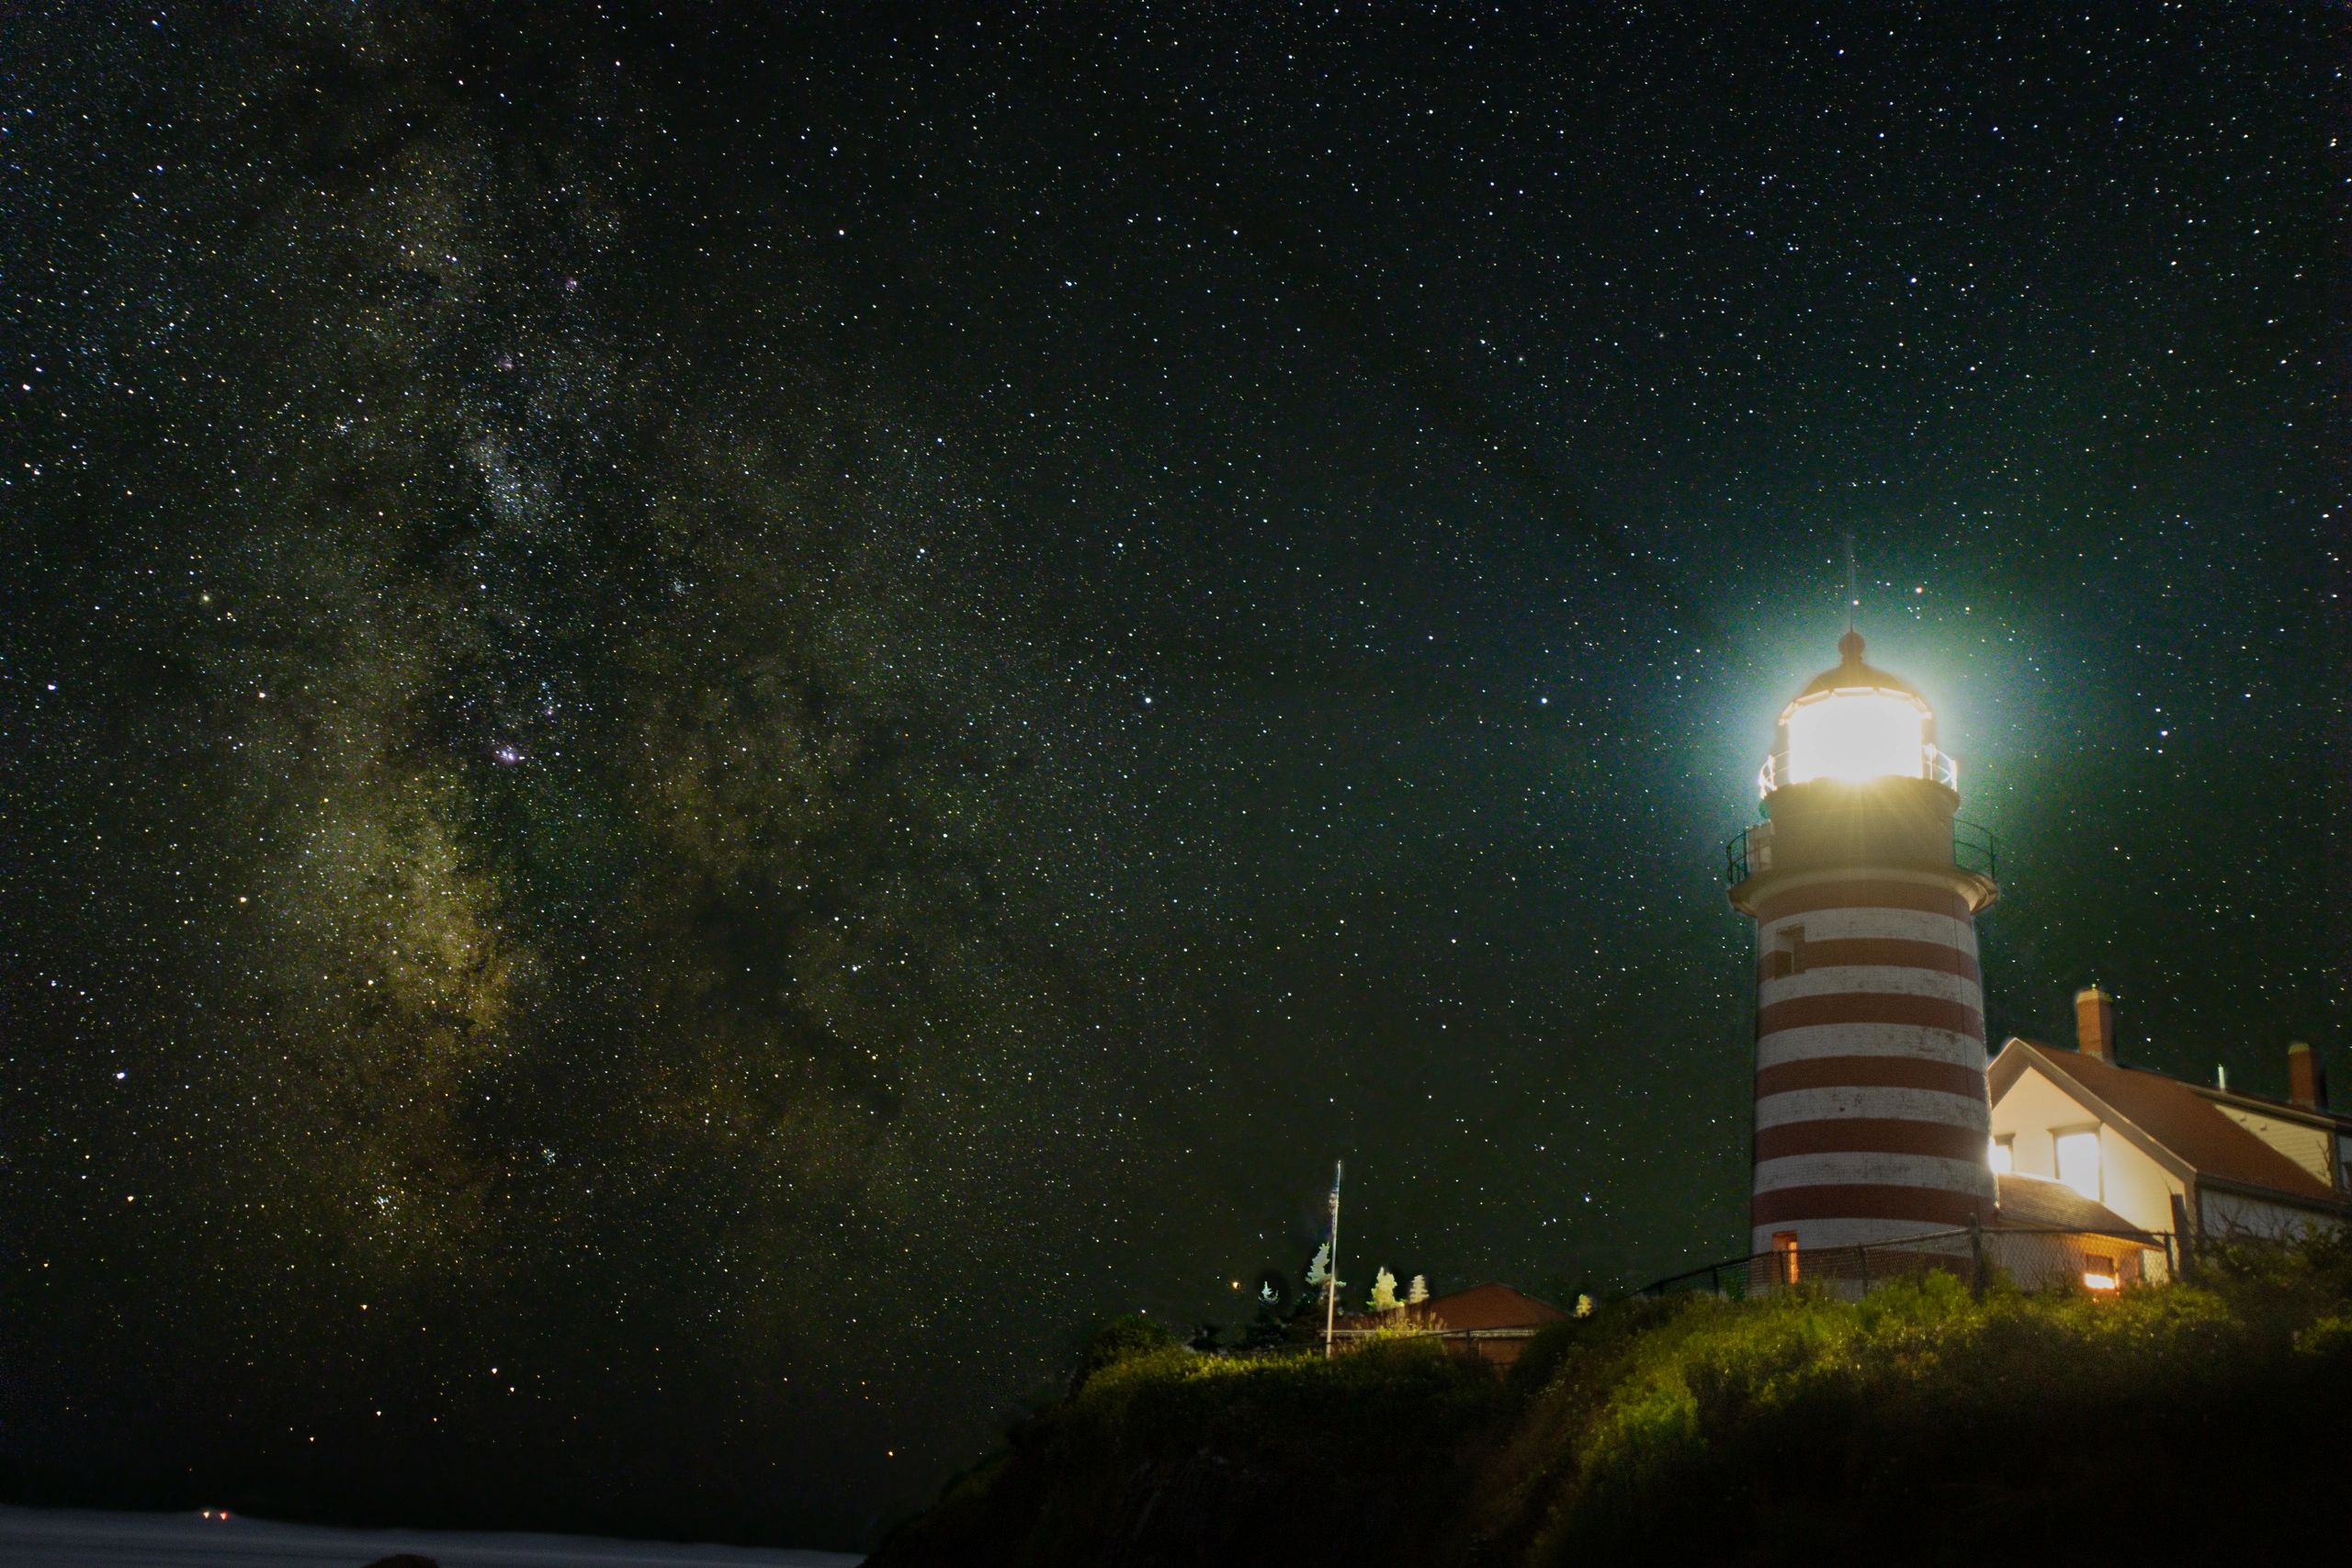 The Milky Way and West Quoddy Lighthouse